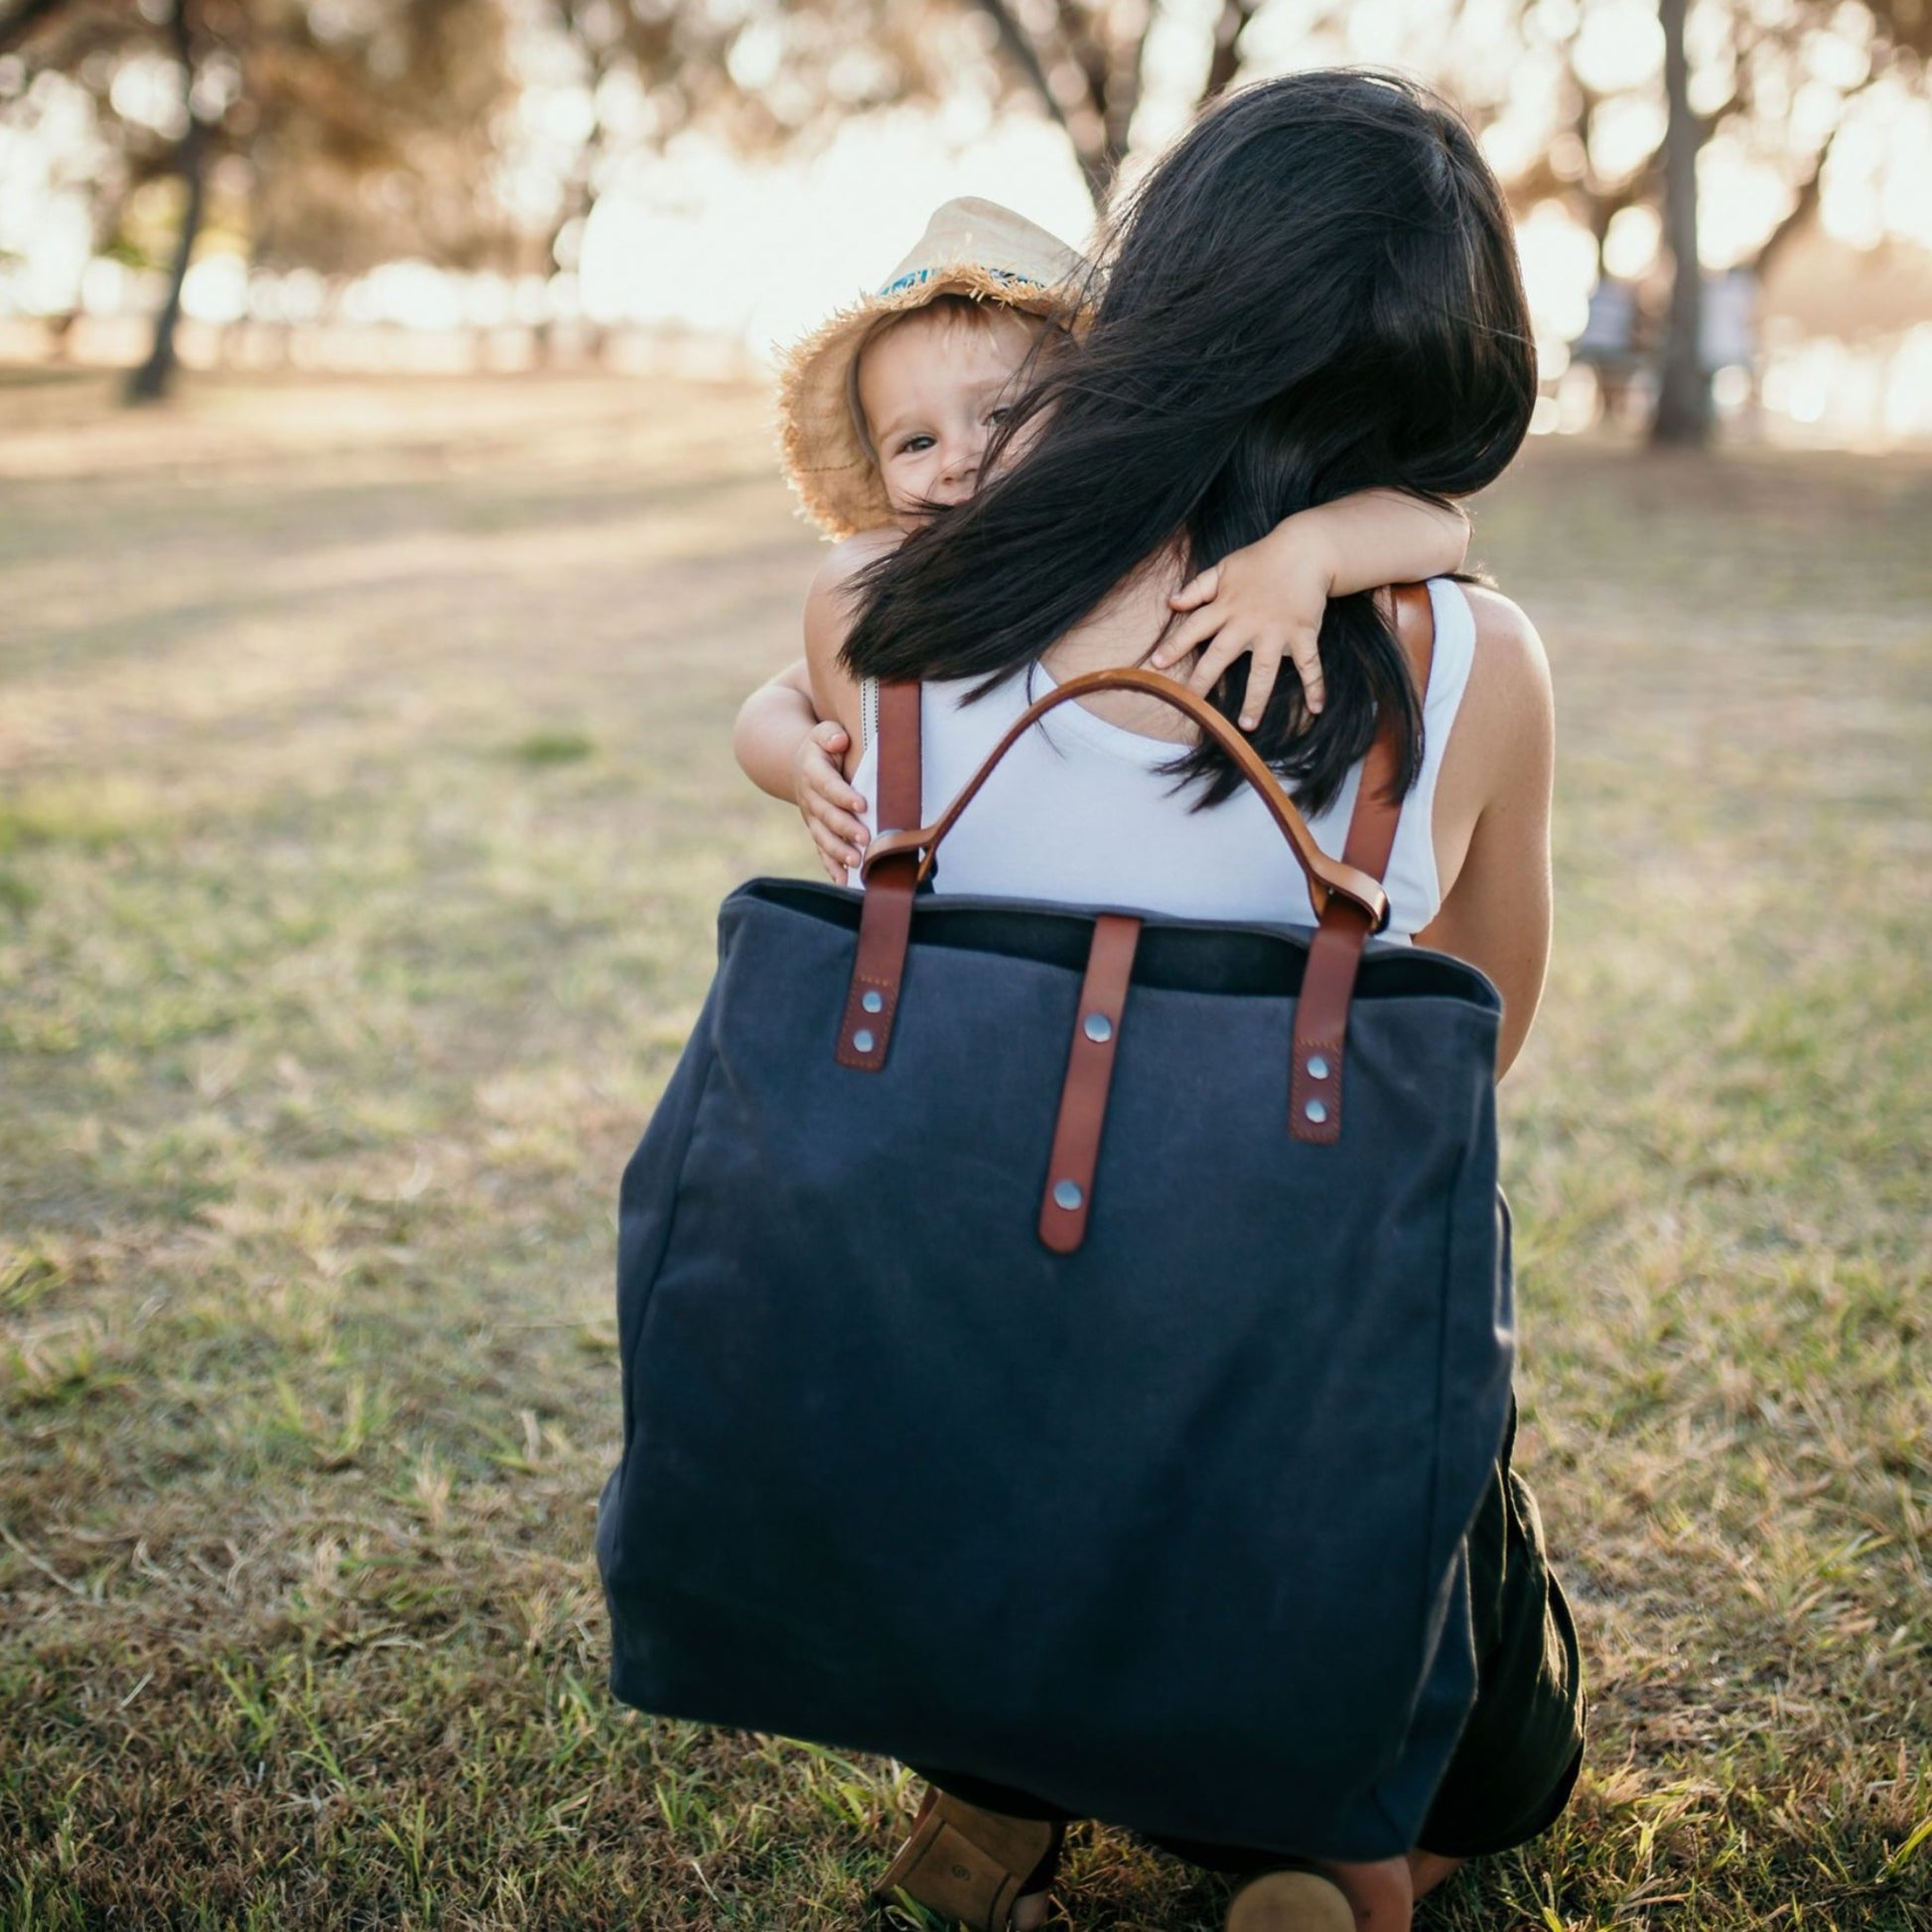 Best nappy bag Australia: Parents in 'love' with insert that transforms any  tote into 'amazing' baby bag